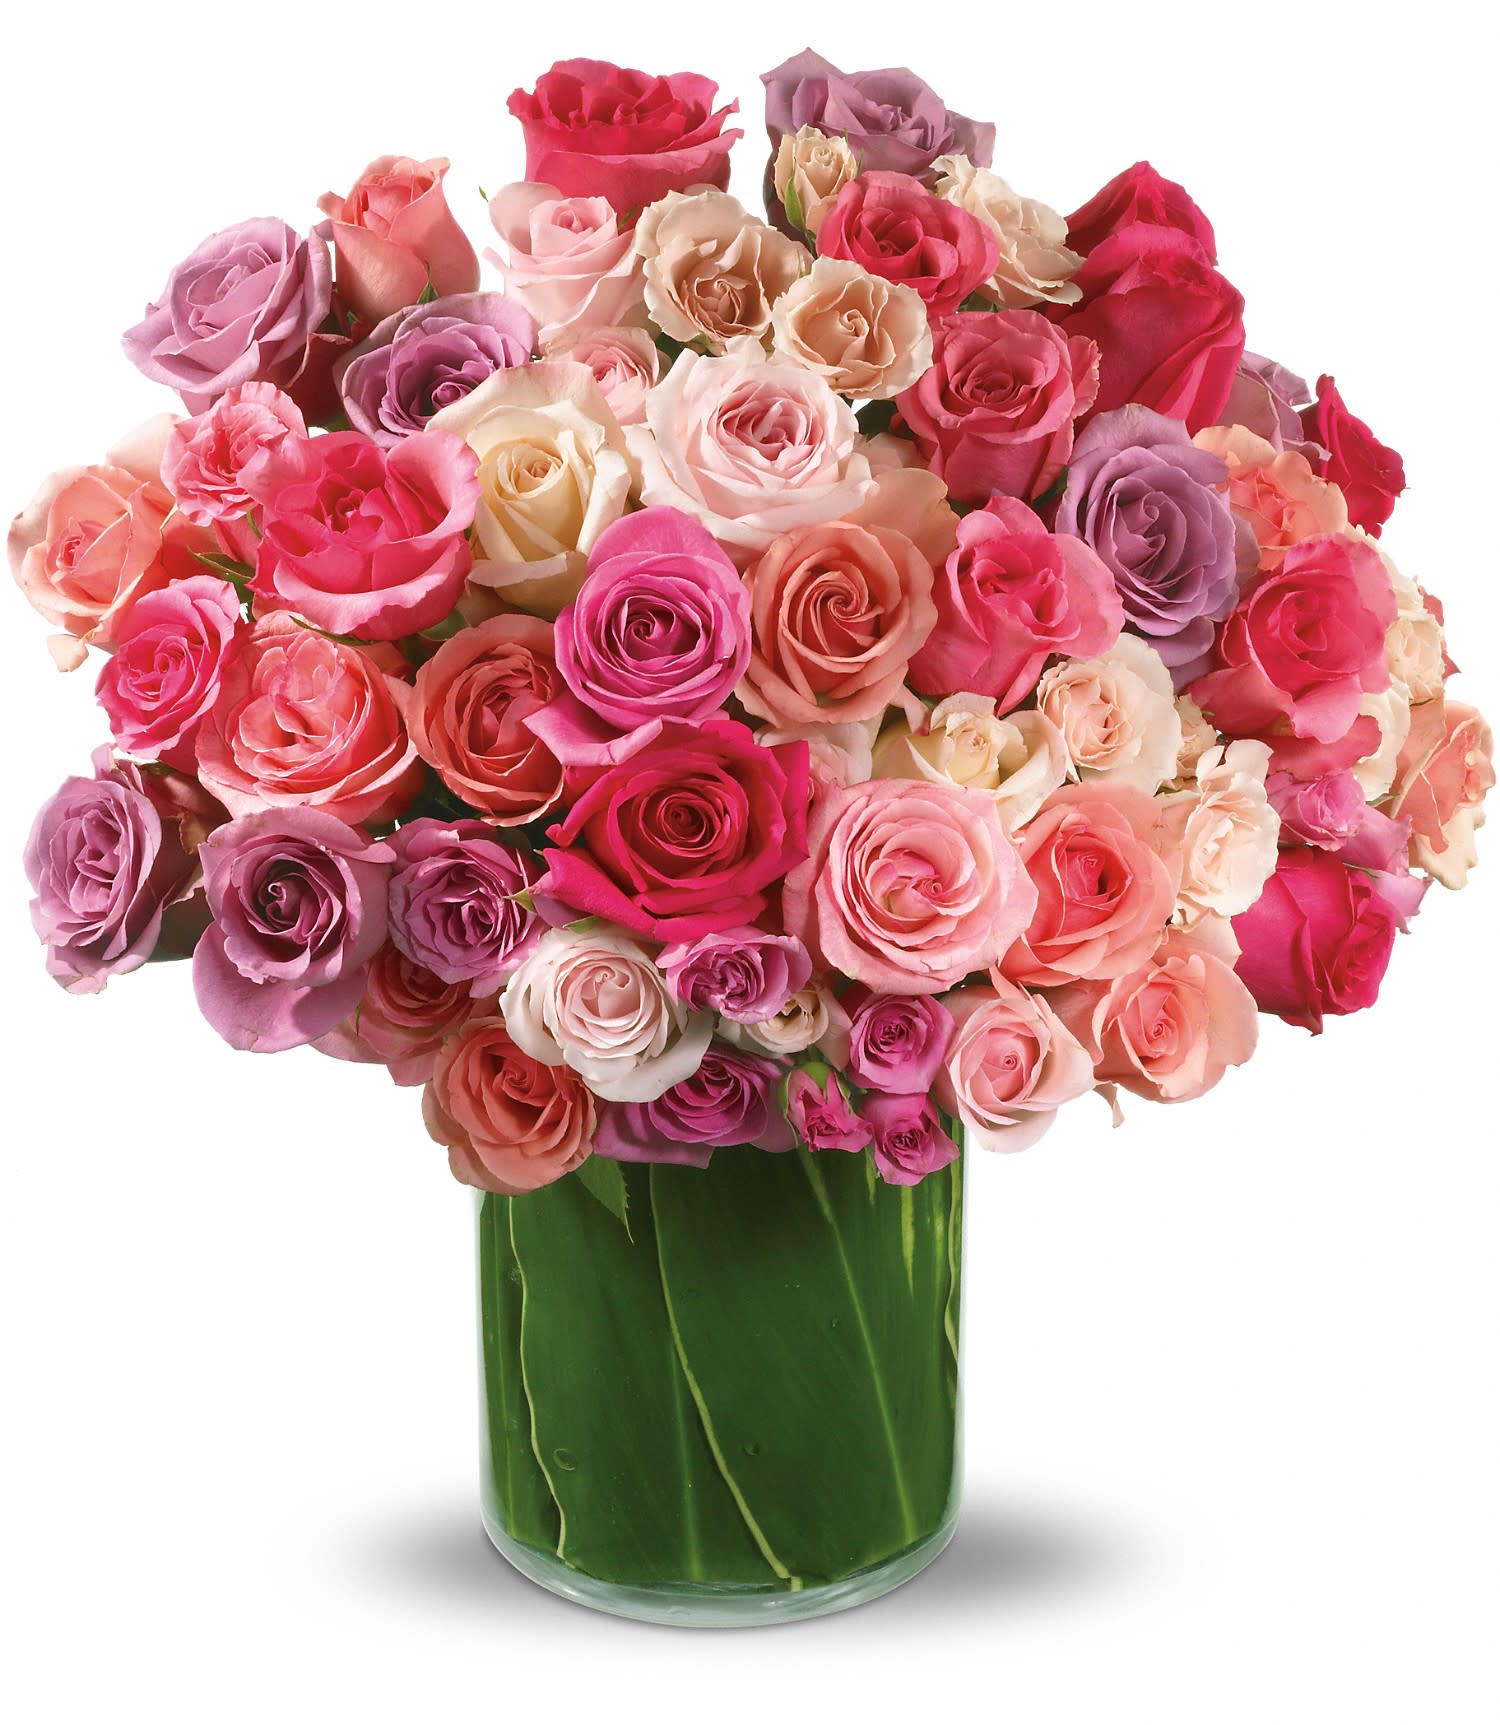 Teleflora's Rose Rapture - The lovely bouquet includes lavender roses, light pink roses, pink roses, light pink spray roses and lavender spray roses accented with assorted greenery. Approximately 17&quot; W x 17&quot; H